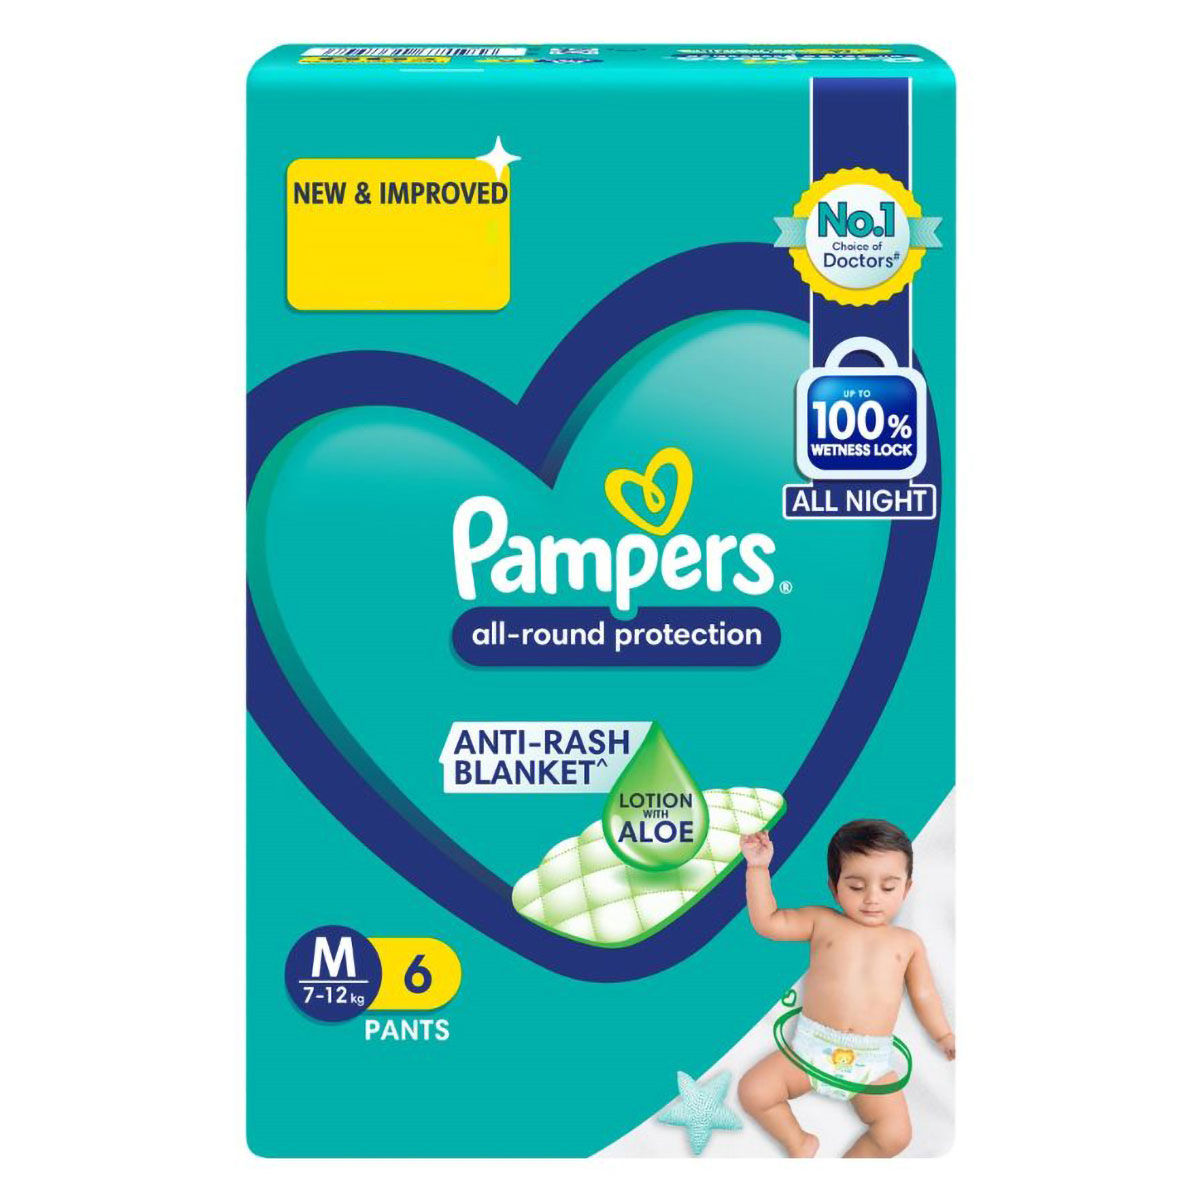 Pampers Diaper Review, Product detail, Comparison|Pampers active,Premium  care & all round protection - YouTube